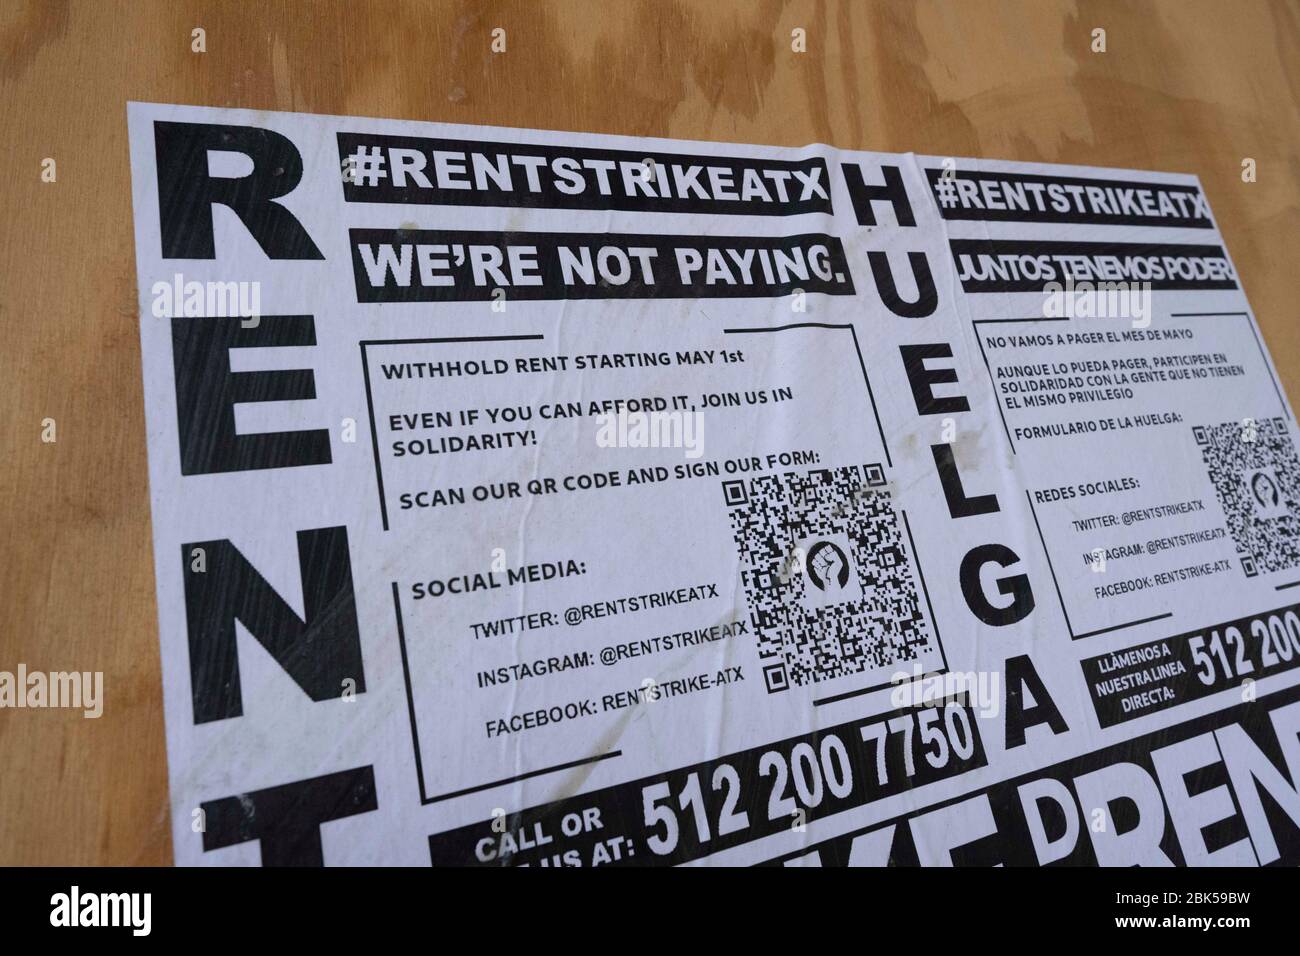 A poster advocating a rent strike on a boarded-up building in downtown's Sixth Street entertainment district. #RentStrikeATX calls for workers who have lost their jobs due to business shutdowns caused by the coronavirus pandemic to withhold paying rent starting May 1 in an effort to get landlords to negotiate with tenants who no longer have an income. Stock Photo